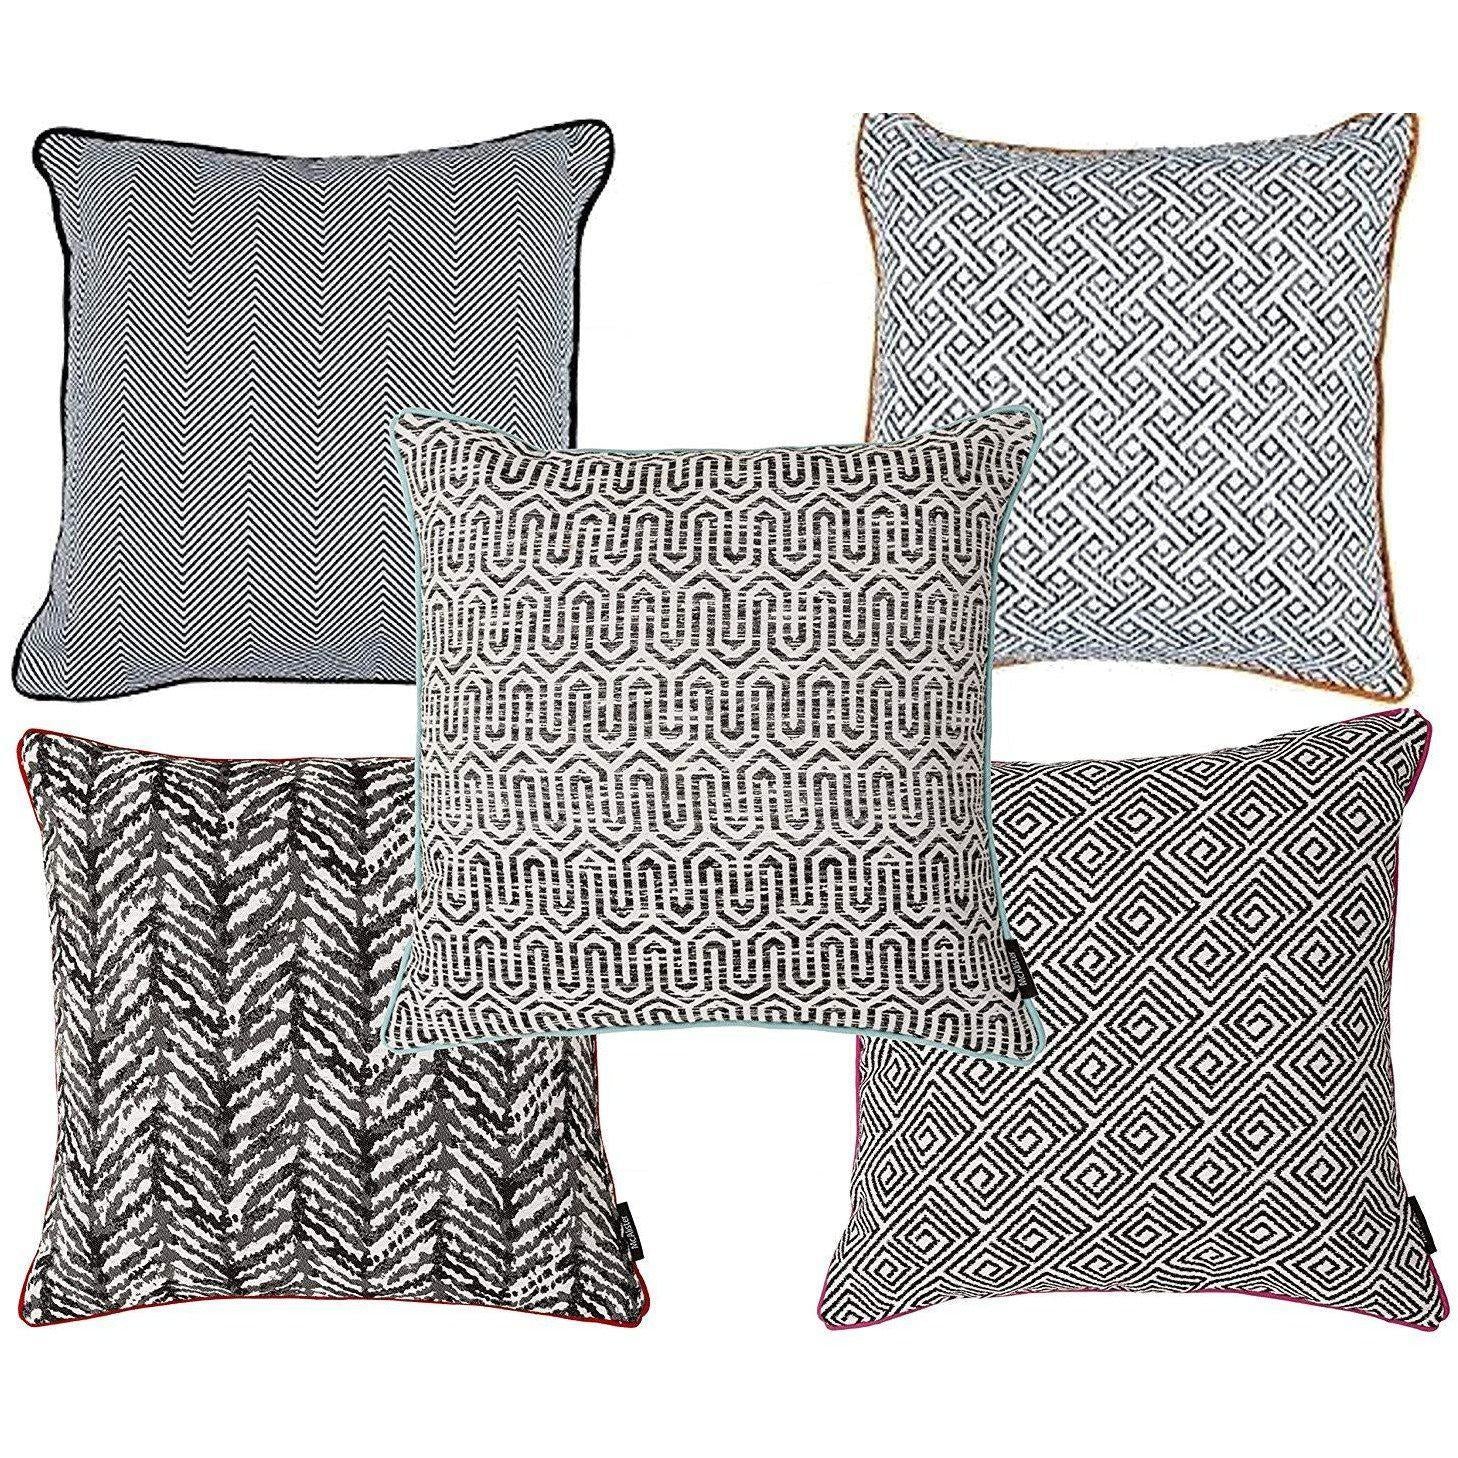 McAlister Textiles Aztec Geometric Black + White 43cm x 43cm Cushion Sets Cushions and Covers Set of 5 Cushion Covers 